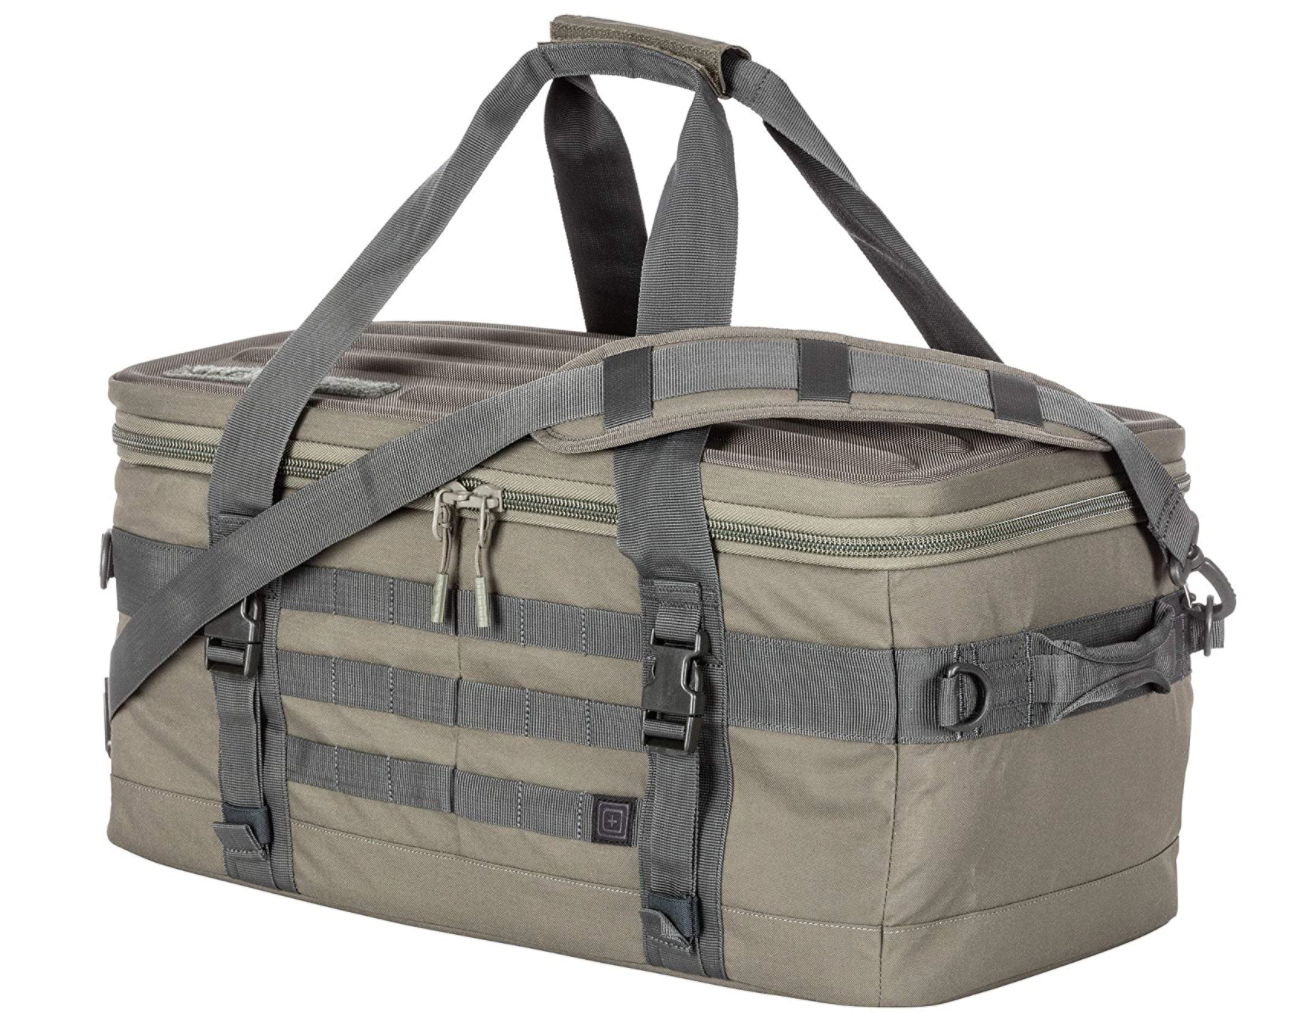 5.11 Tactical Range Master duffel review: the one bag to carry it all